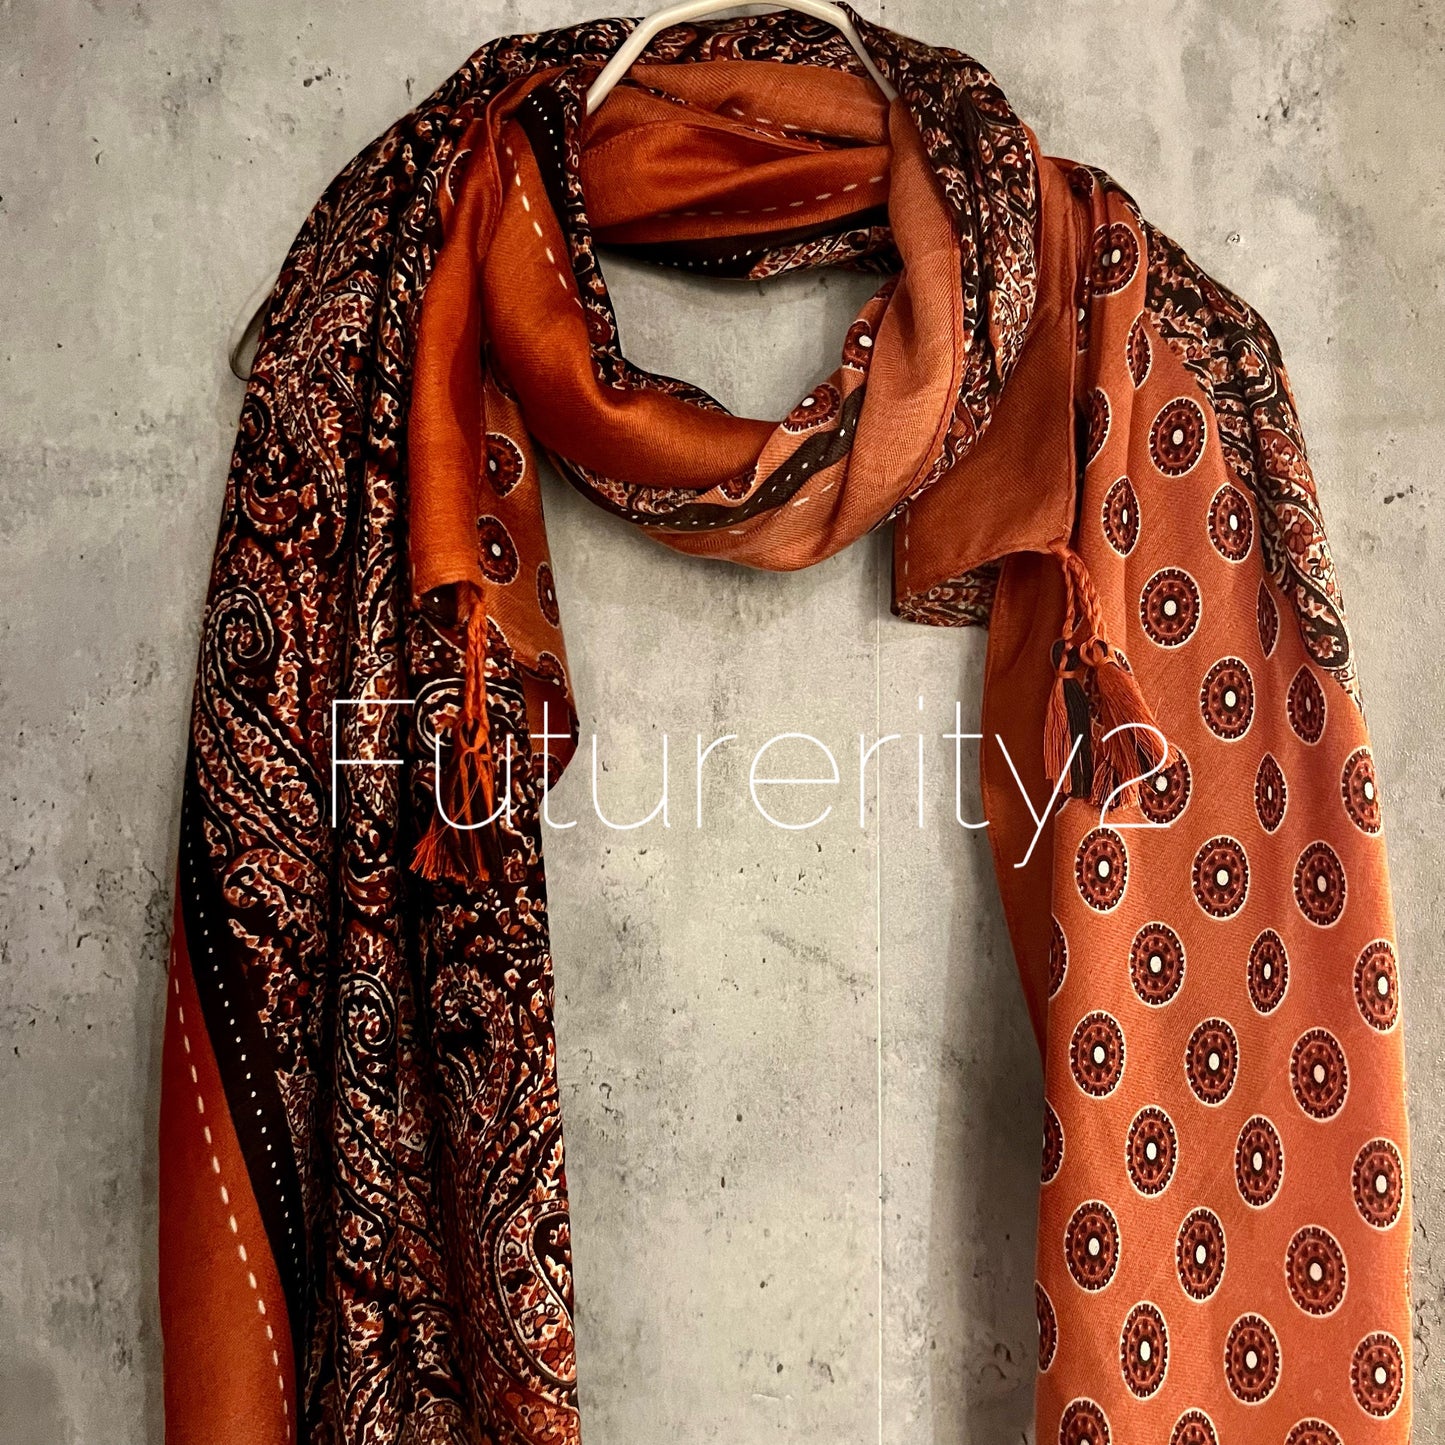 Modern Paisley With Tassels Orange Cotton Scarf/Summer Autumn Winter Scarf/Gifts For Mum/Gifts For Her Birthday Christmas/UK Seller